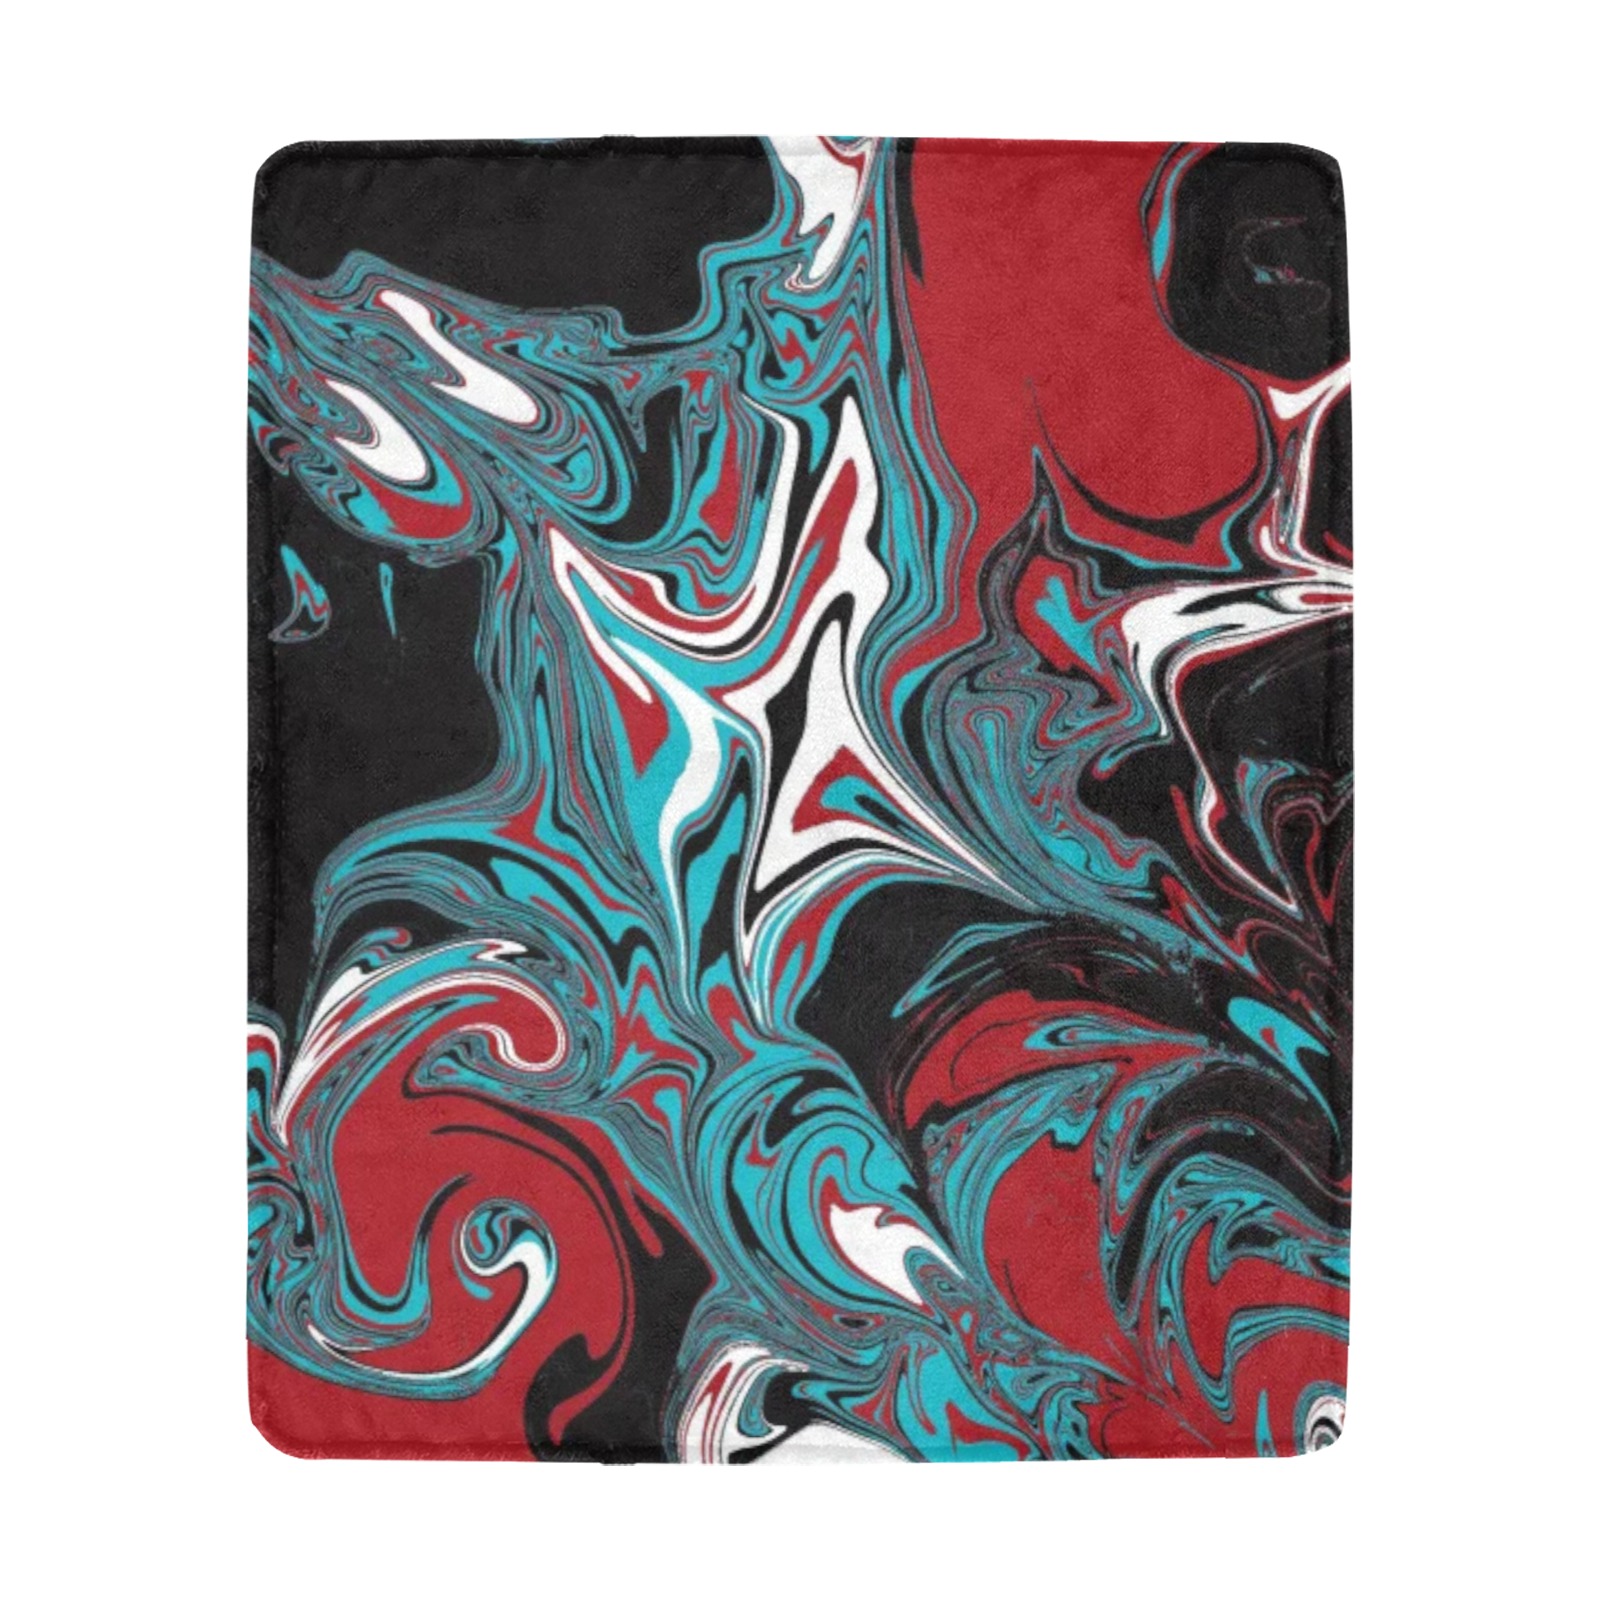 Dark Wave of Colors Ultra-Soft Micro Fleece Blanket 50"x60" (Thick)